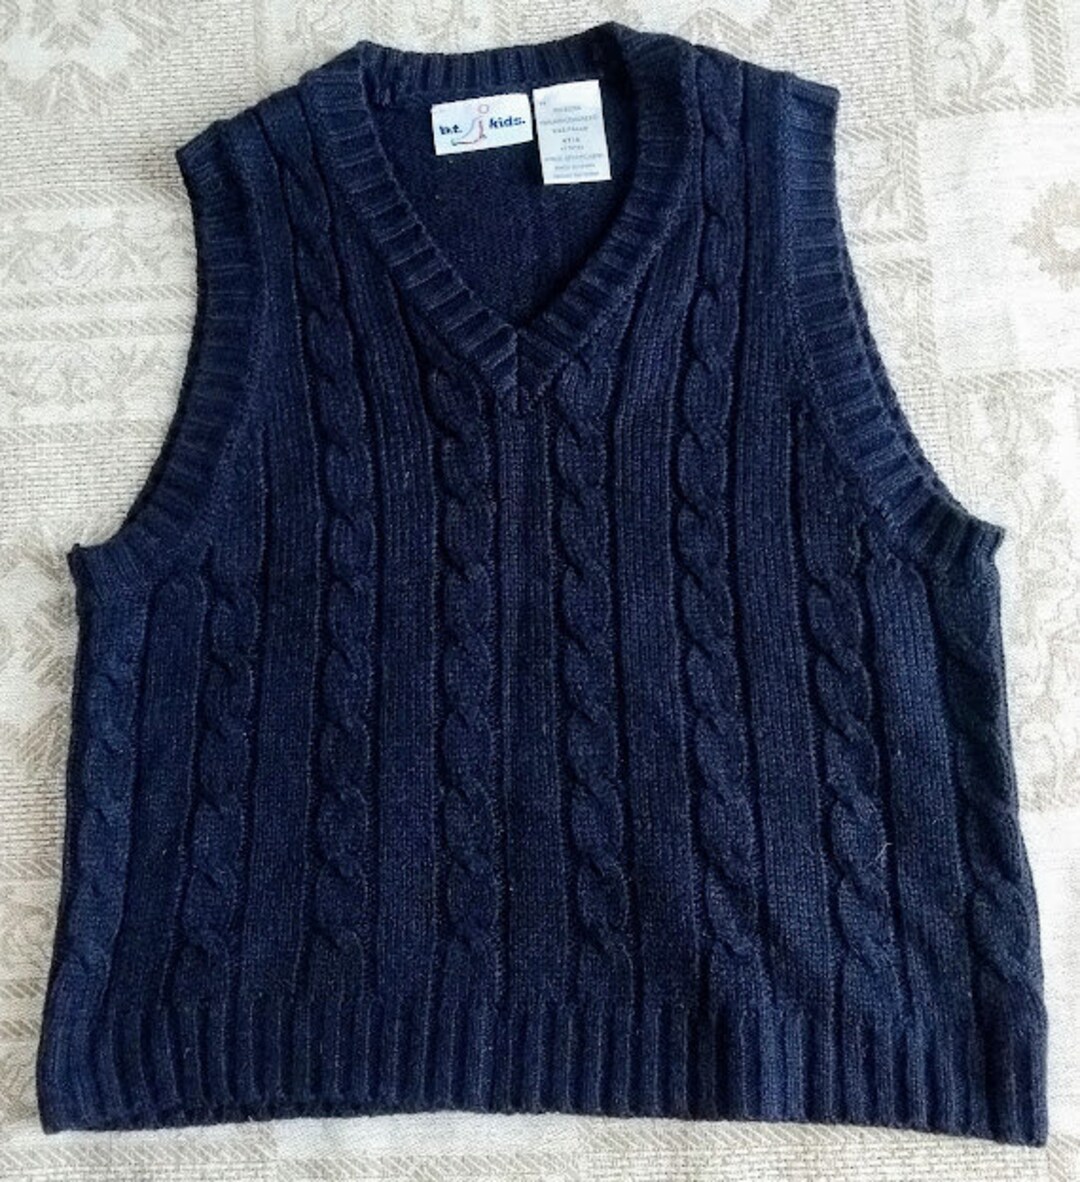 Toddler Sweater Vest Navy Soft Cable Knit Toddler Size 4 T - Etsy